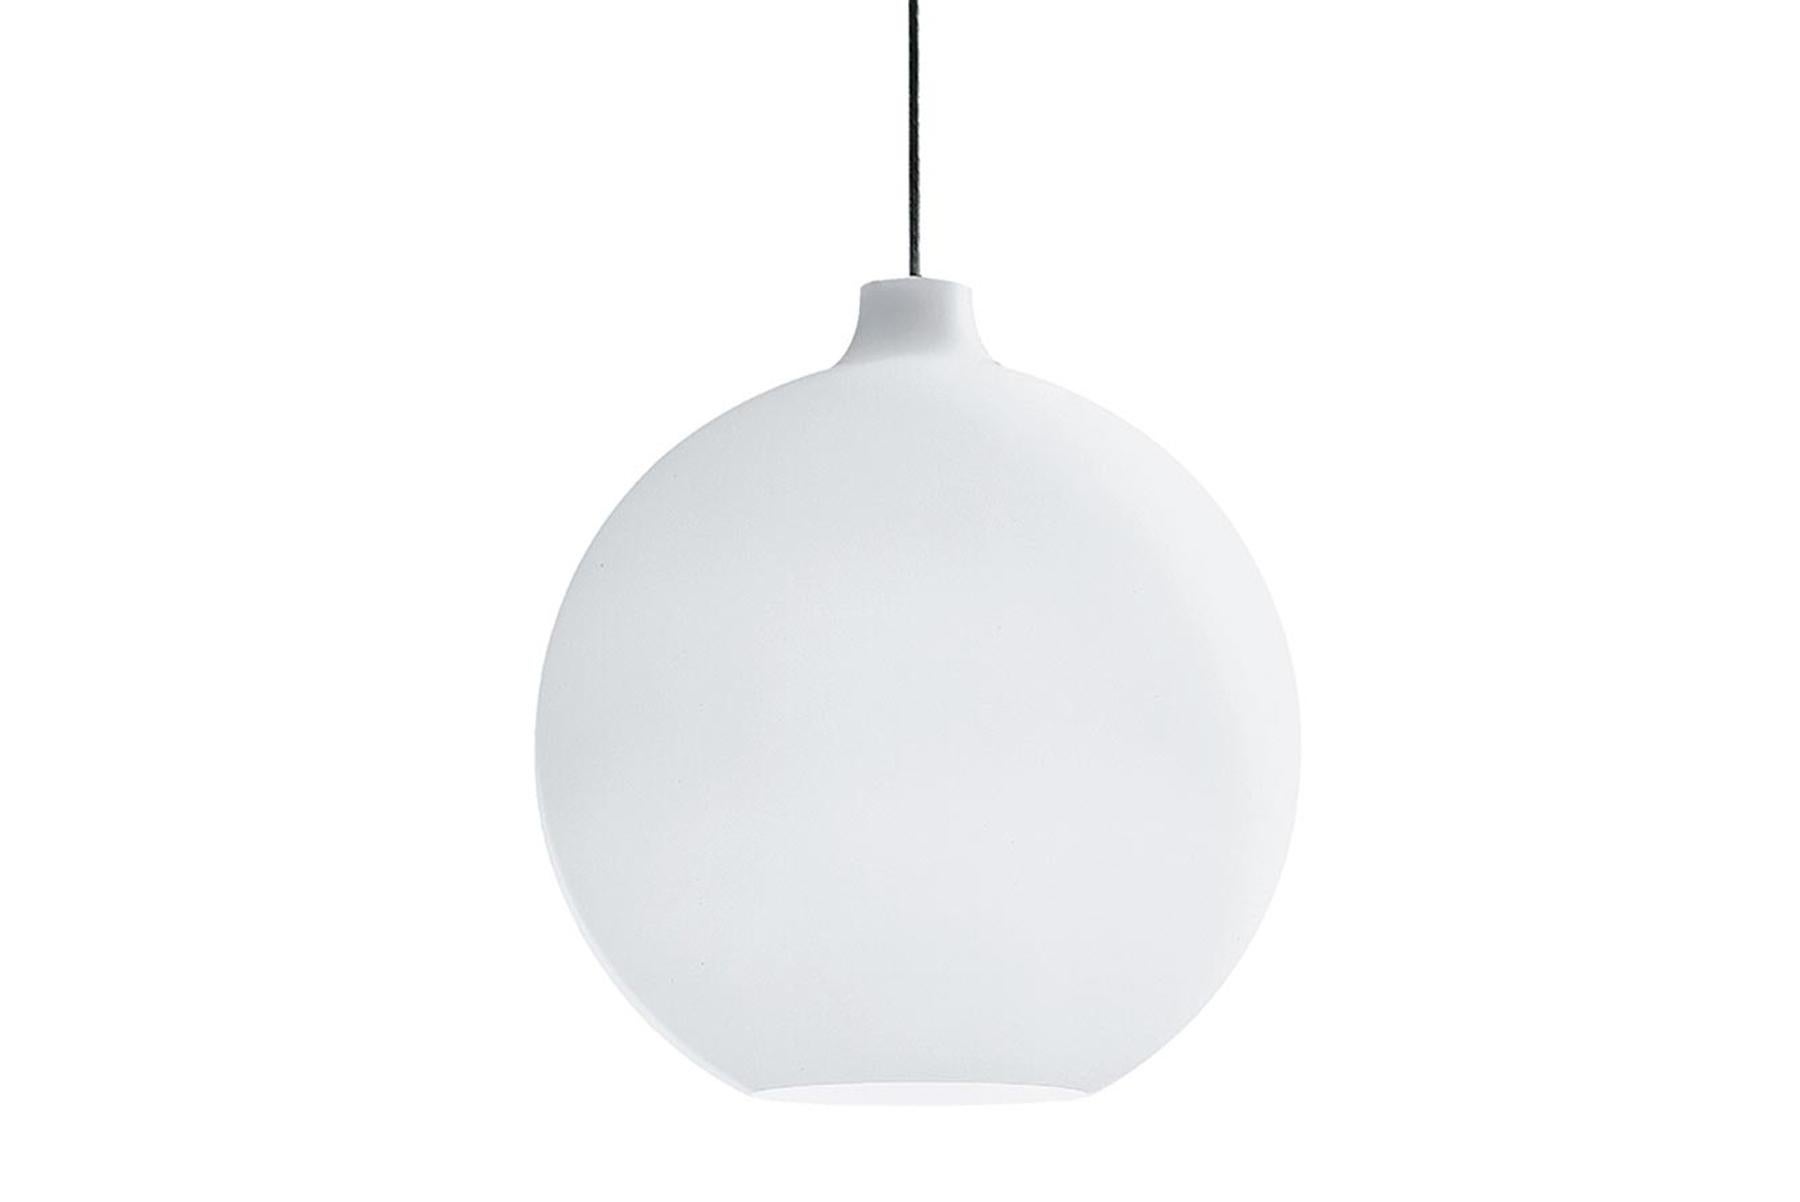 The fixture provides uniform, general and diffuse illumination. The opening at the bottom of the glass produces downwards directed light. The quality of the glass ensures that the fixture is evenly lit. Vilhelm Wohlert designed the Wohlert pendant